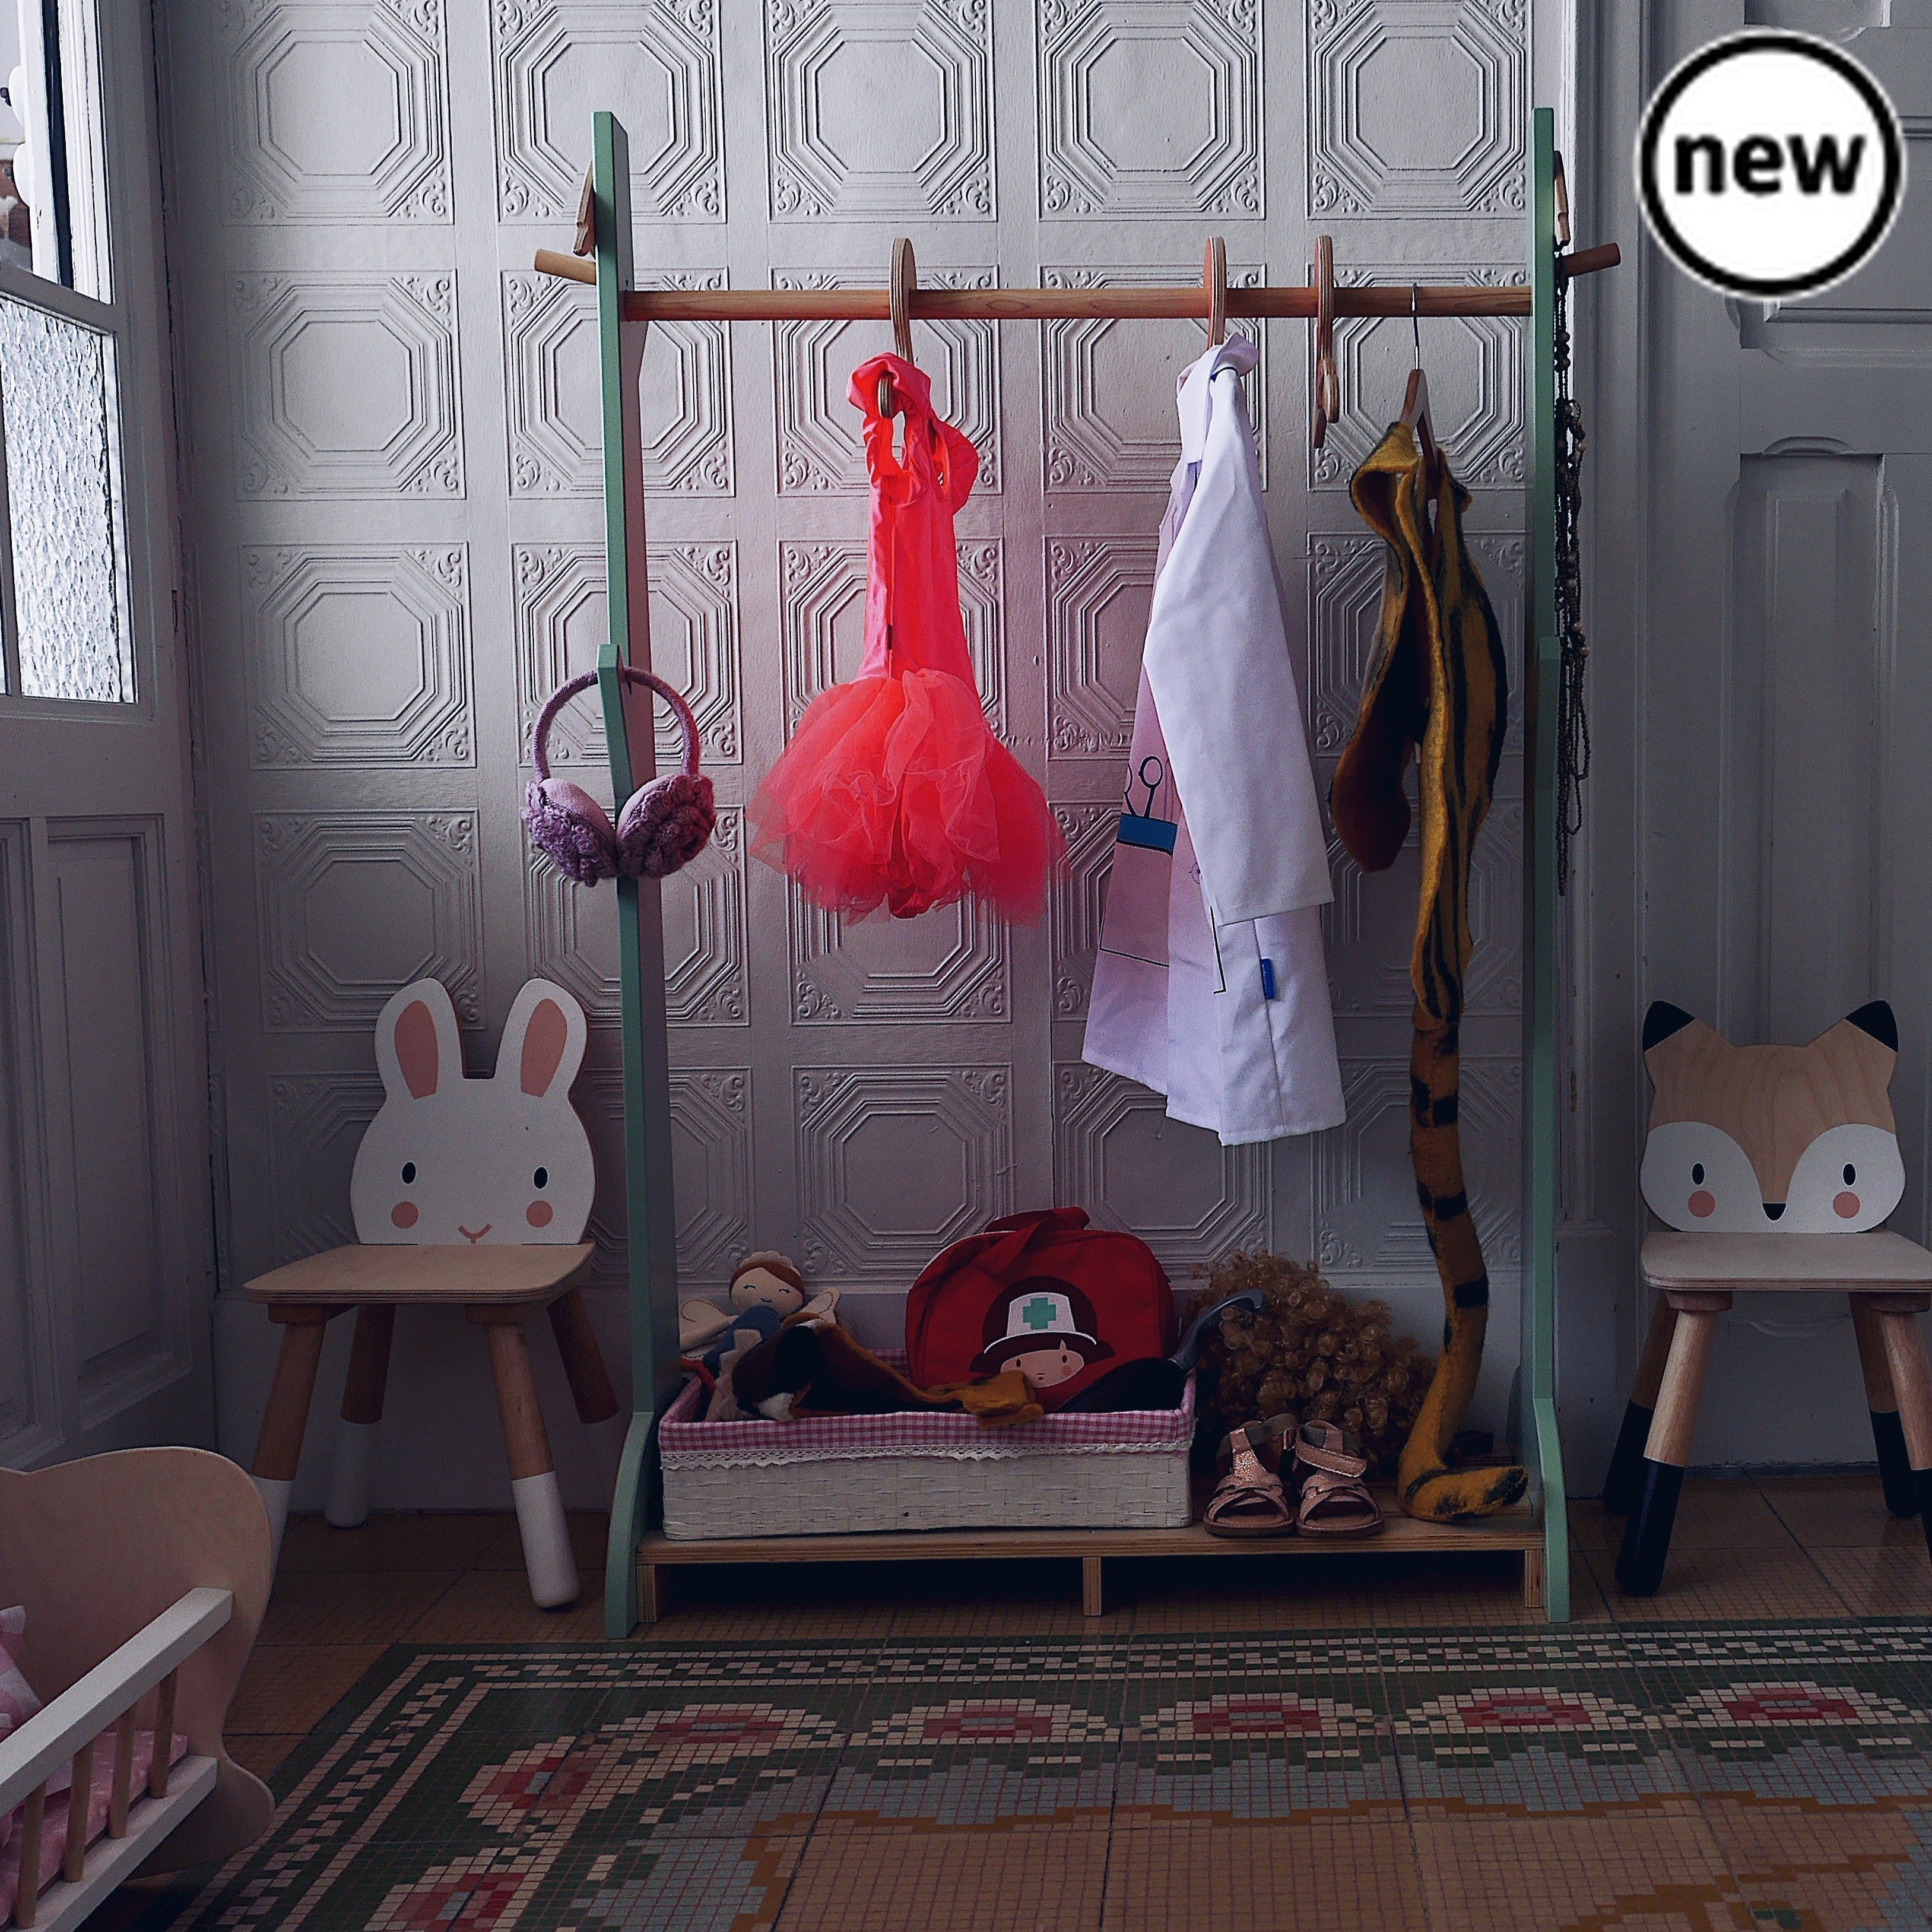 Tenderleaf Toys Wooden Forest Clothes Rail, Introducing the Tenderleaf Toys Wooden Forest Clothes Rail, a delightful addition to any child's bedroom or playroom. Designed and made with utmost care by Tenderleaf Toys, this clothes rail combines functionality with a charming woodland-inspired aesthetic.With its fresh and clean design, this clothes rail is the perfect height for little ones to independently hang up their clothes or store their shoes and bags on the base. Encourage your child to develop their o